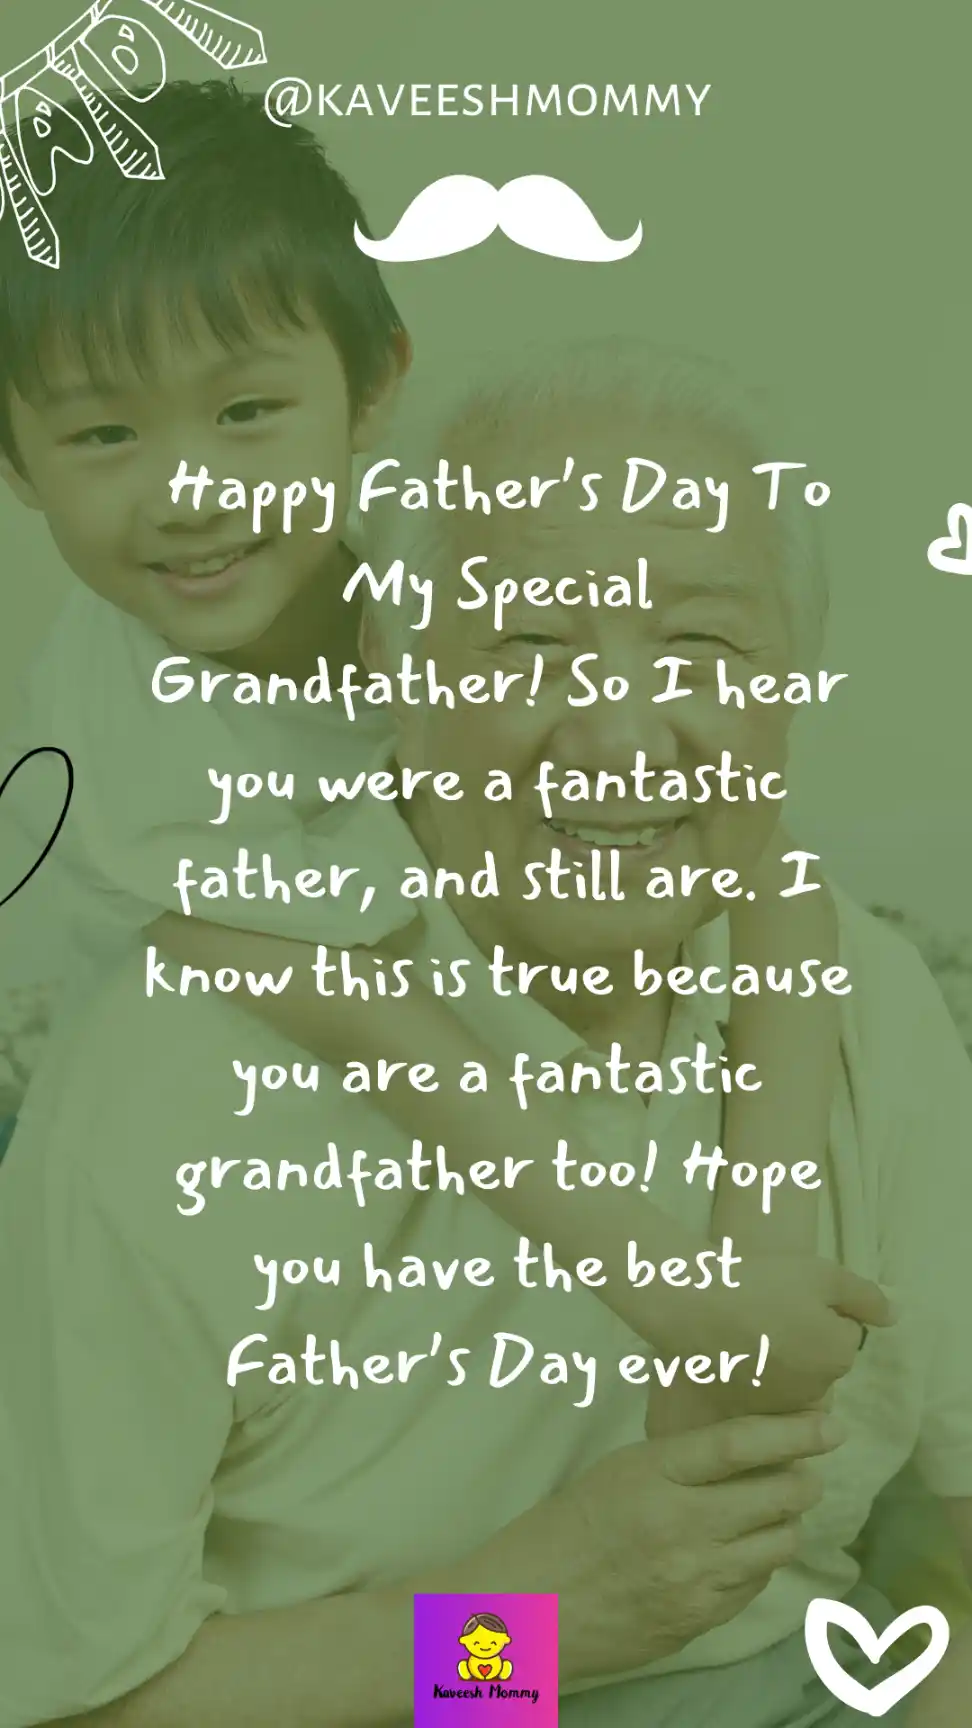 fathers day message for grandpa-KAVEESH MOMMY 